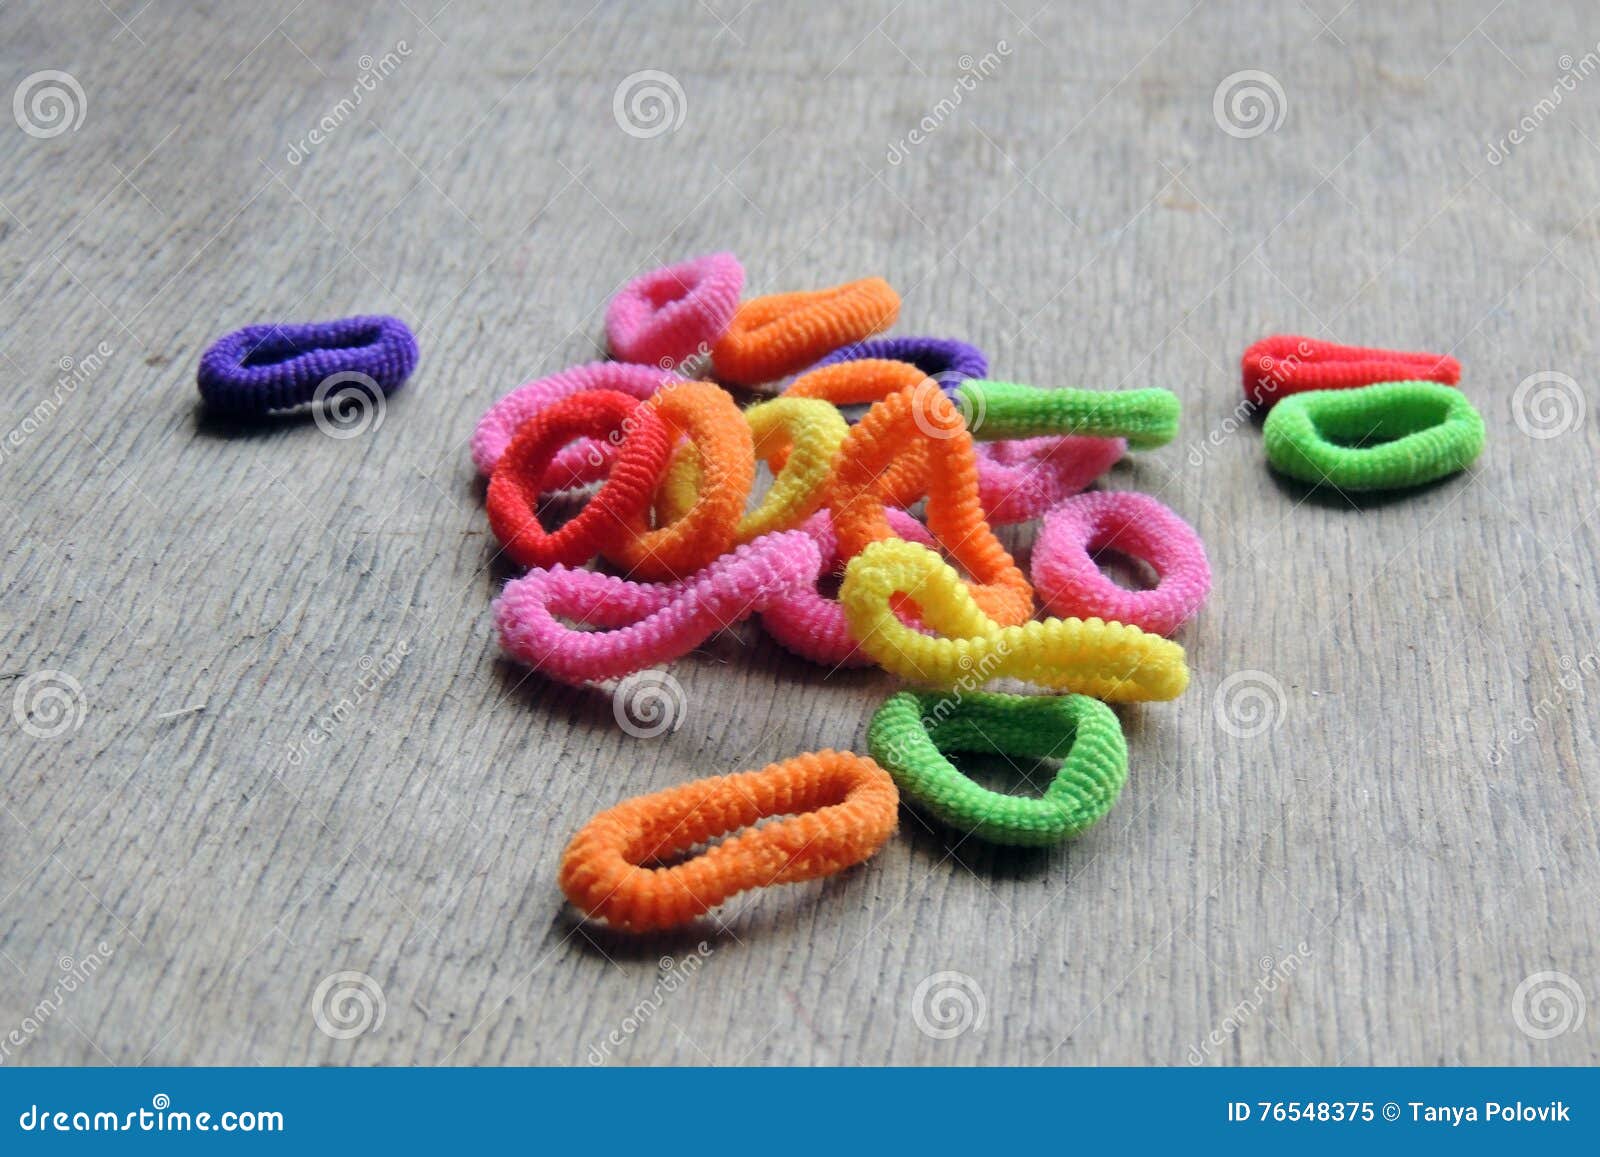 Colored Rubber Bands for Hair Braiding Stock Image - Image of hair,  beautiful: 76548375